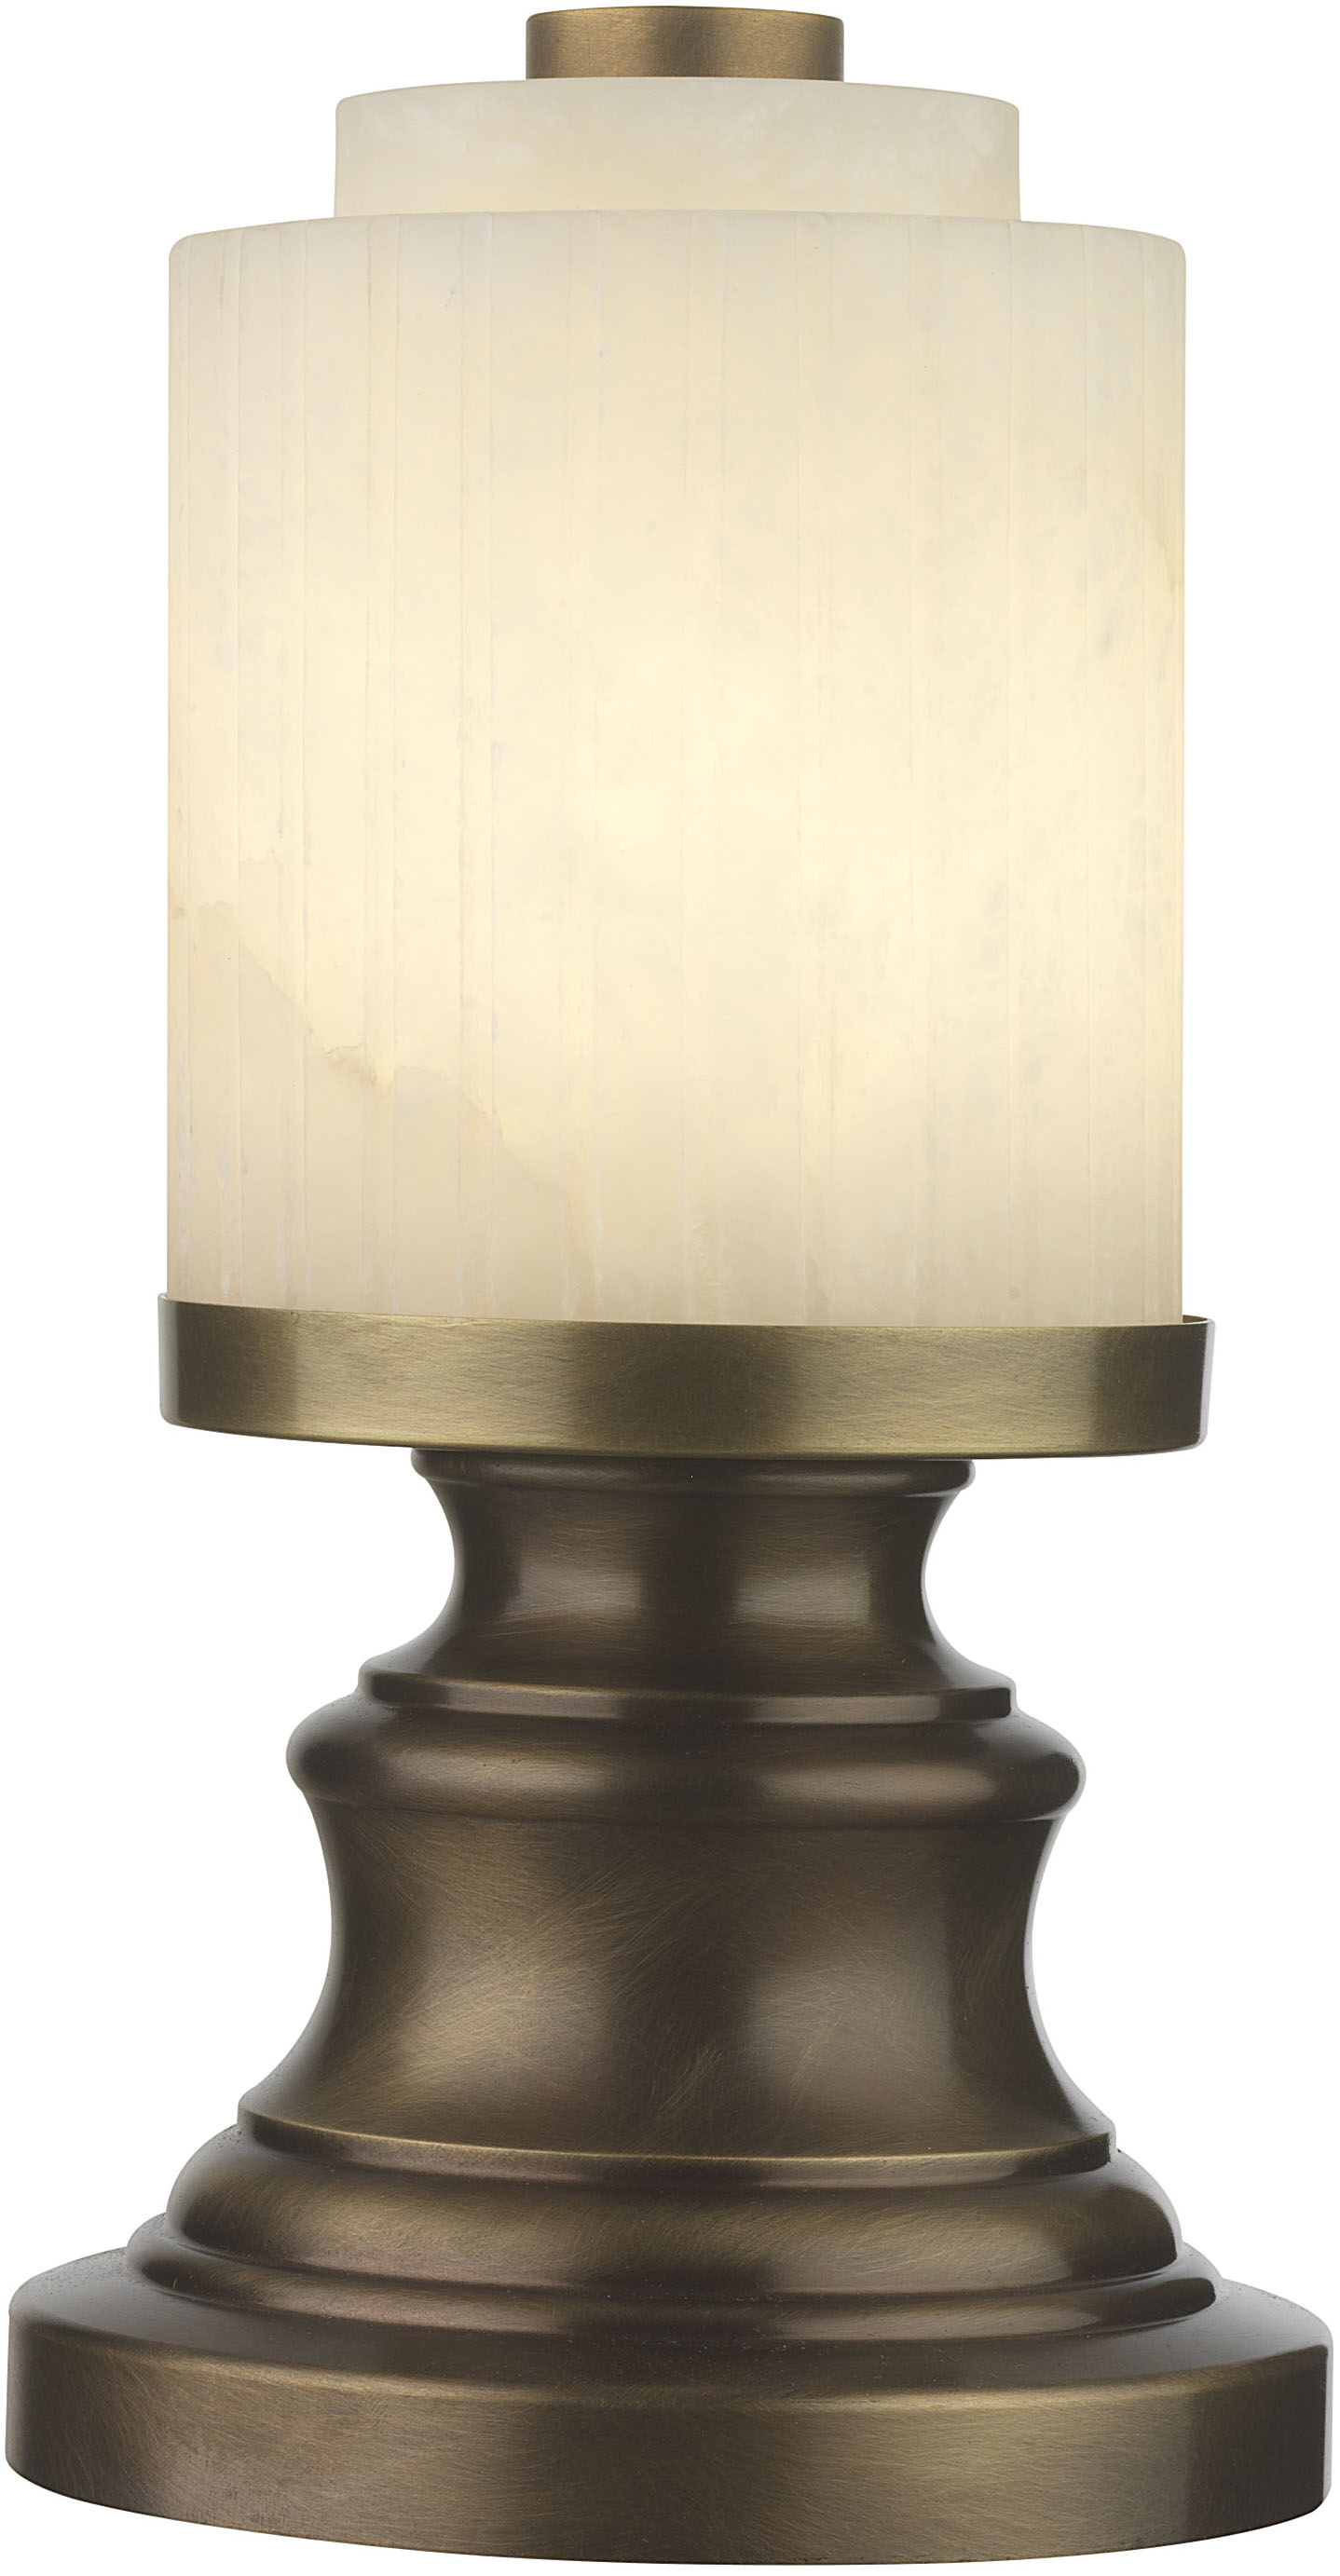 Rechargeable cordless lamps range from Northern Lights.  The Clermont features a brass base and white alabaster shade.